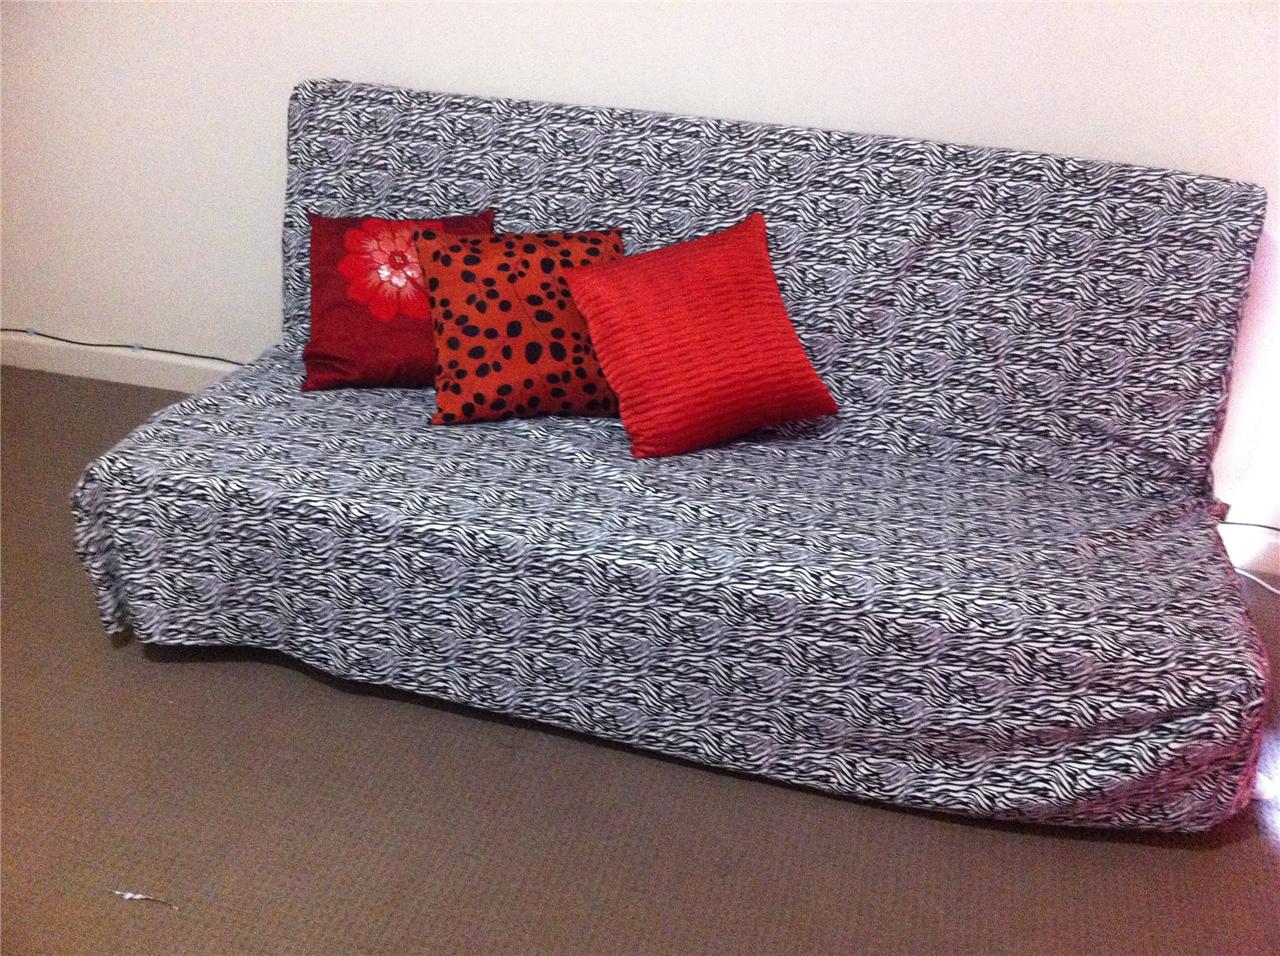 exarby sofa bed cover